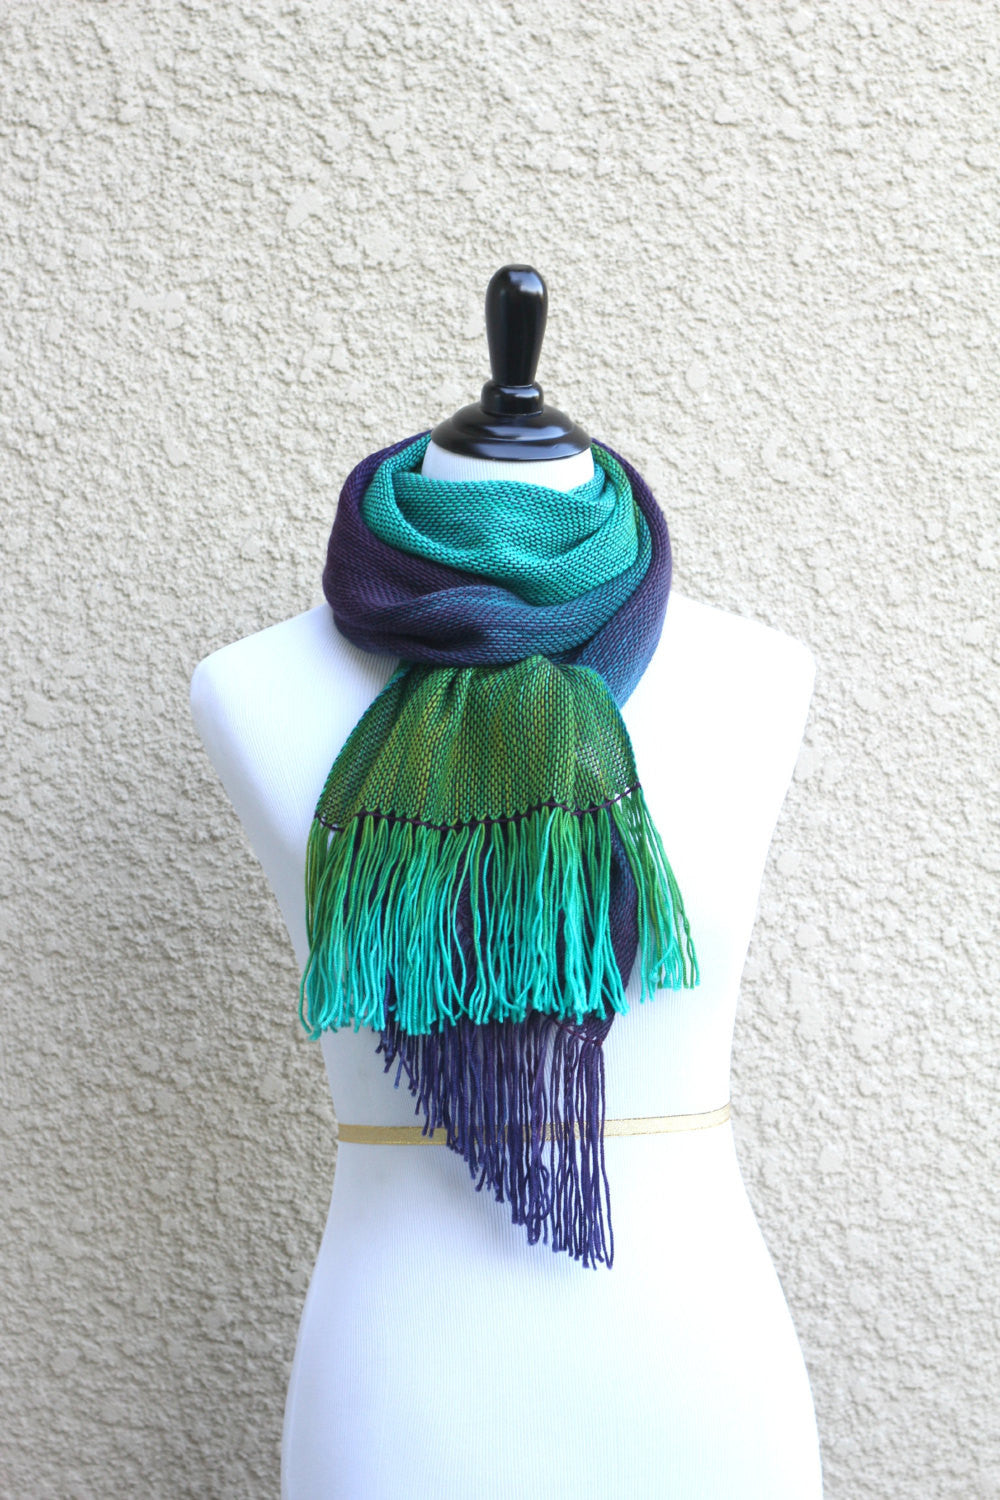 Woven scarf in green and purple colors, peacock scarf